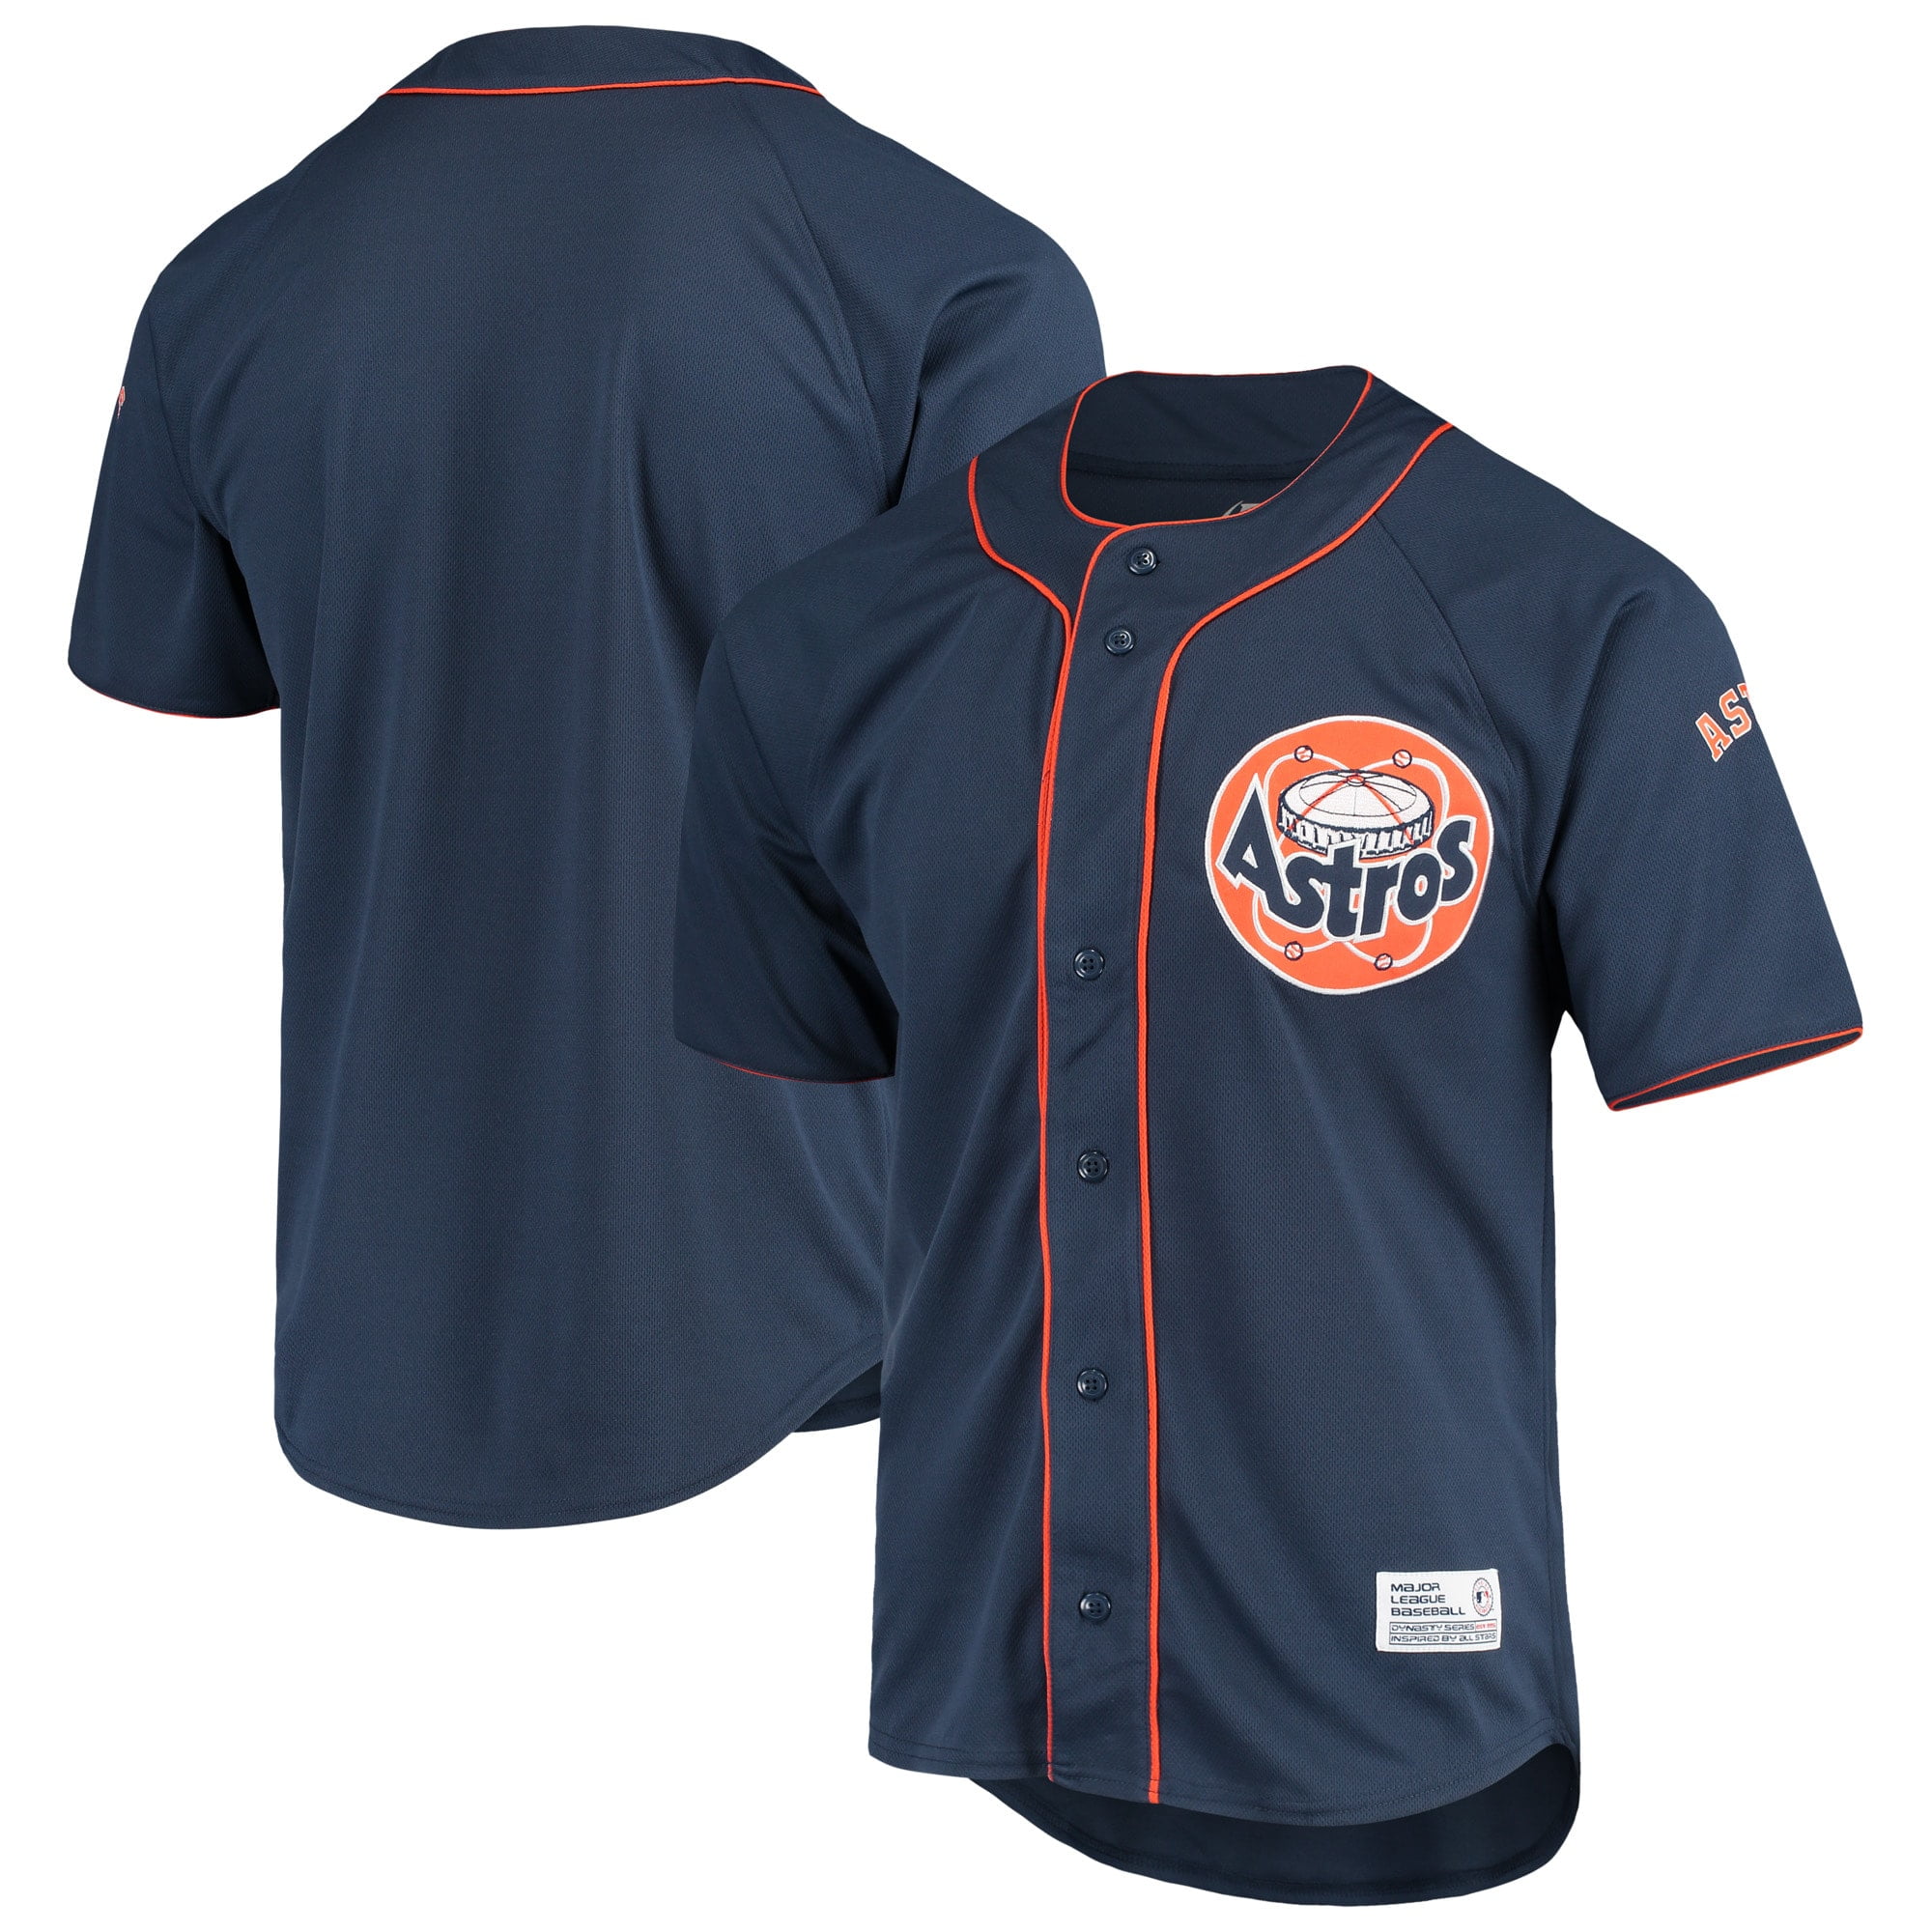 Houston Astros Stitches Team Color Full-Button Jersey - Navy 